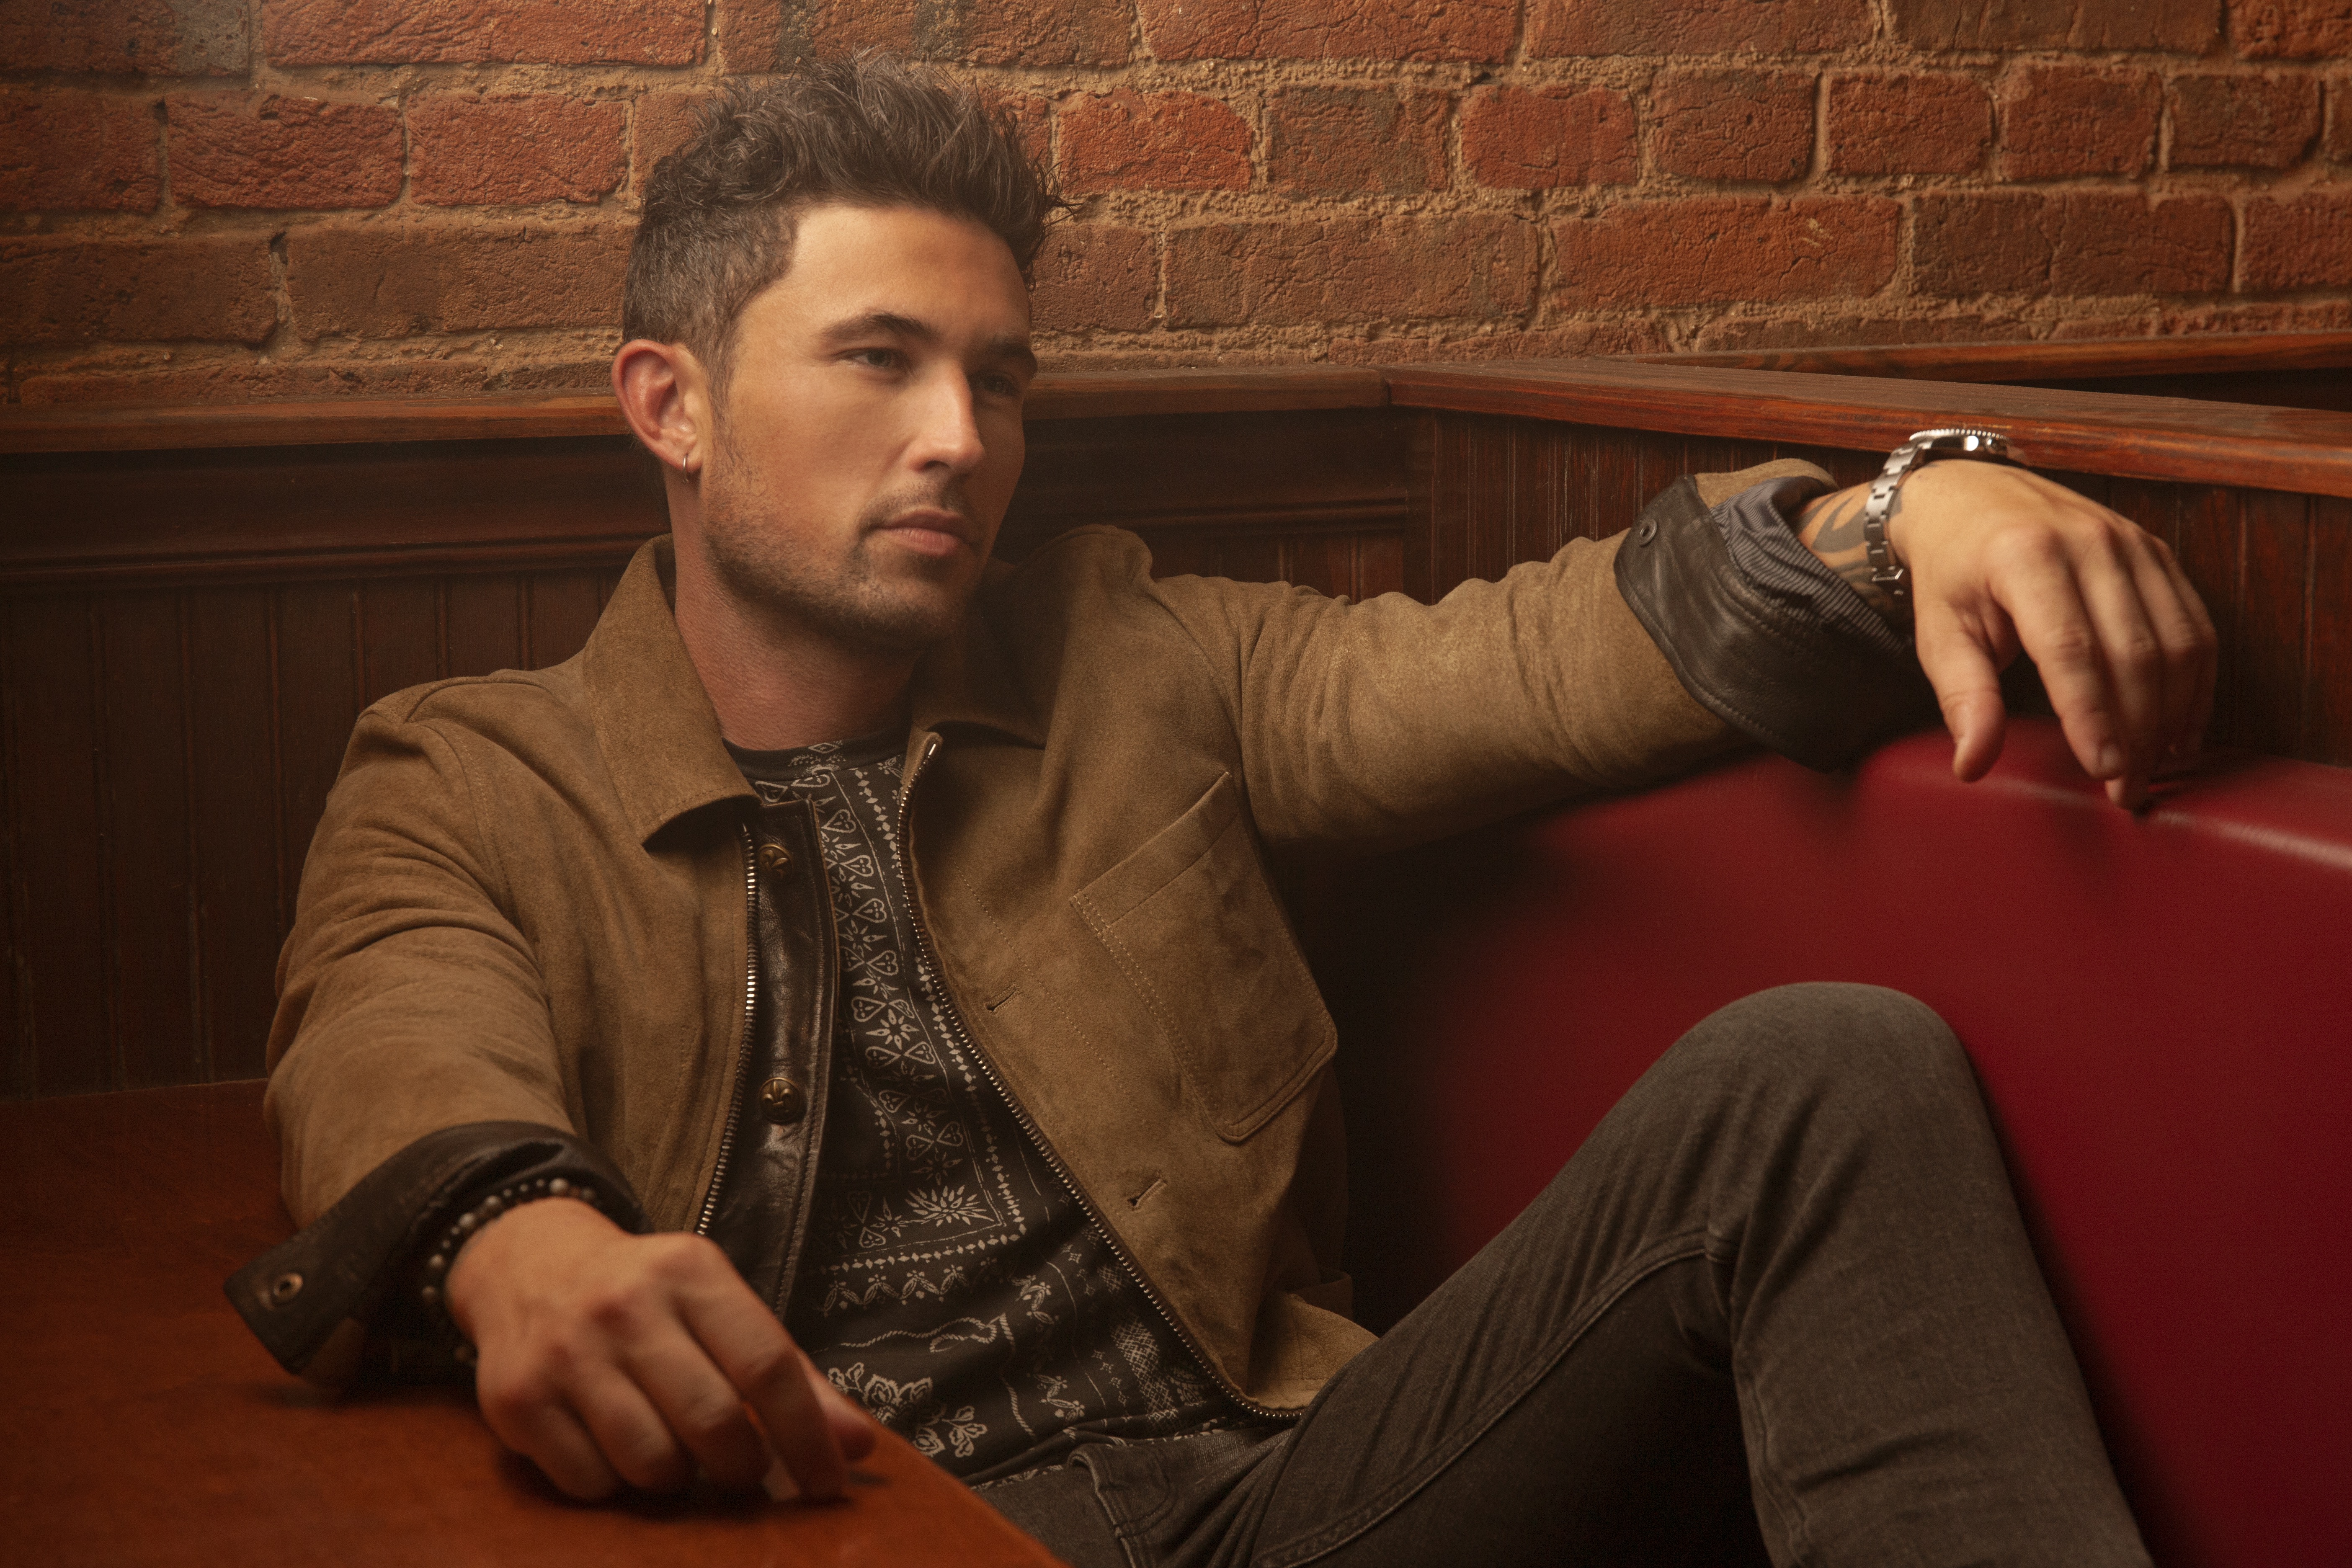 MICHAEL RAY’S HONKYTONK THROWBACK OPTS FOR HUMAN CONNECTION OVER HEARTACHE